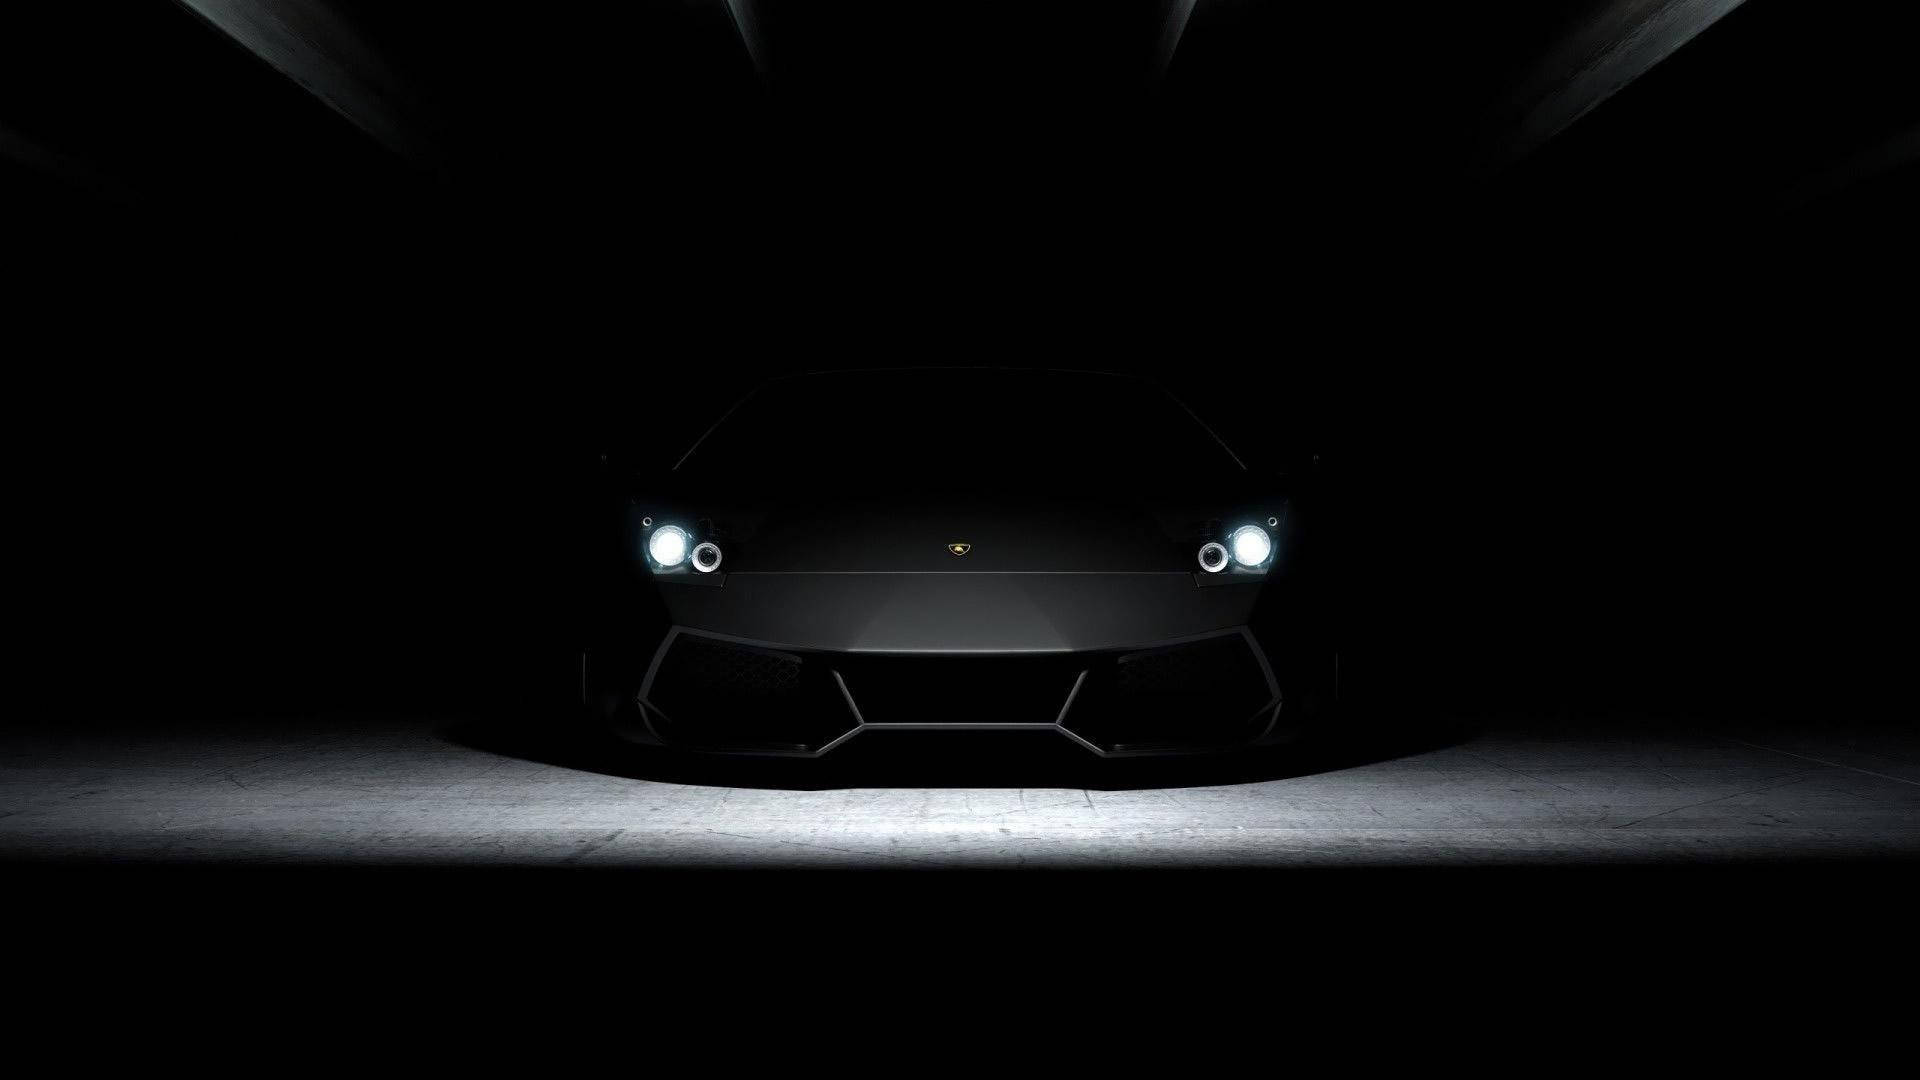 Car Lurking In Total Black Darkness Background